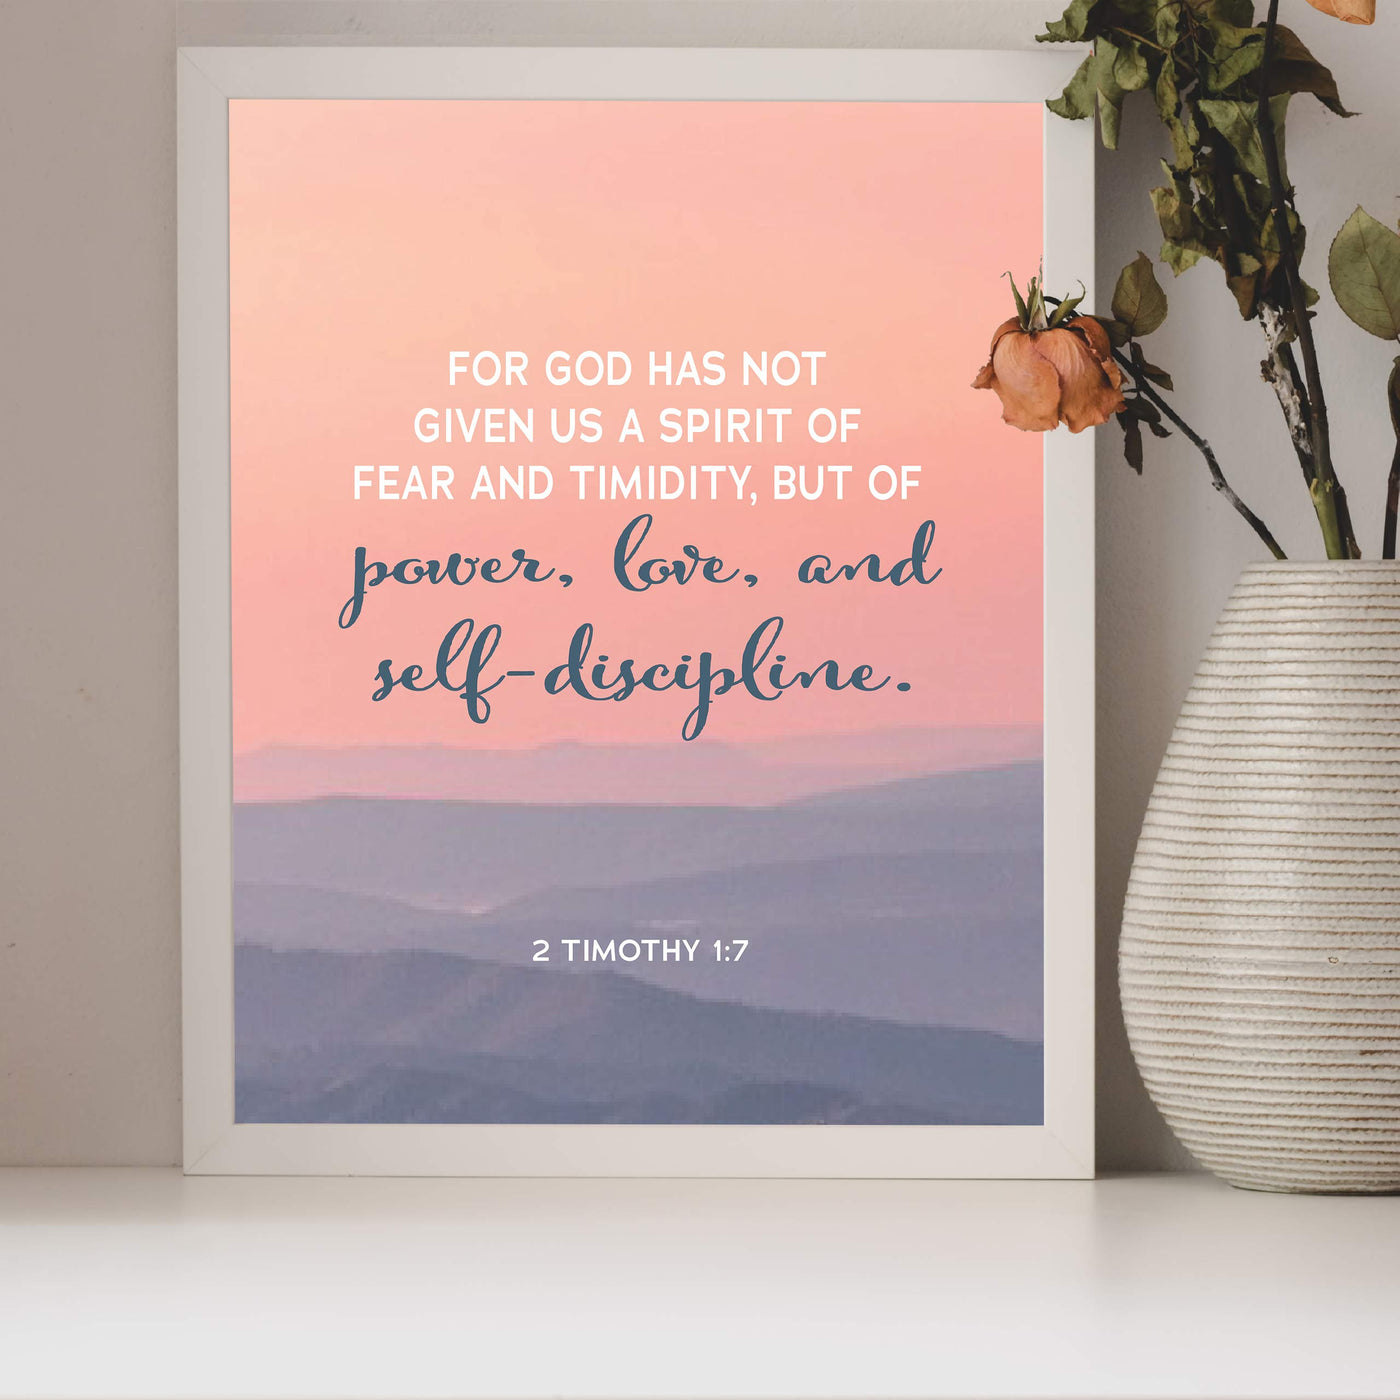 ?God Has Given Us a Spirit of Power-Love?- 2 Timothy 1:7- Bible Verse Wall Art- 8 x 10" Modern Typographic Design. Scripture Wall Print-Ready to Frame. Home-Office-Church D?cor. Great Christian Gift!